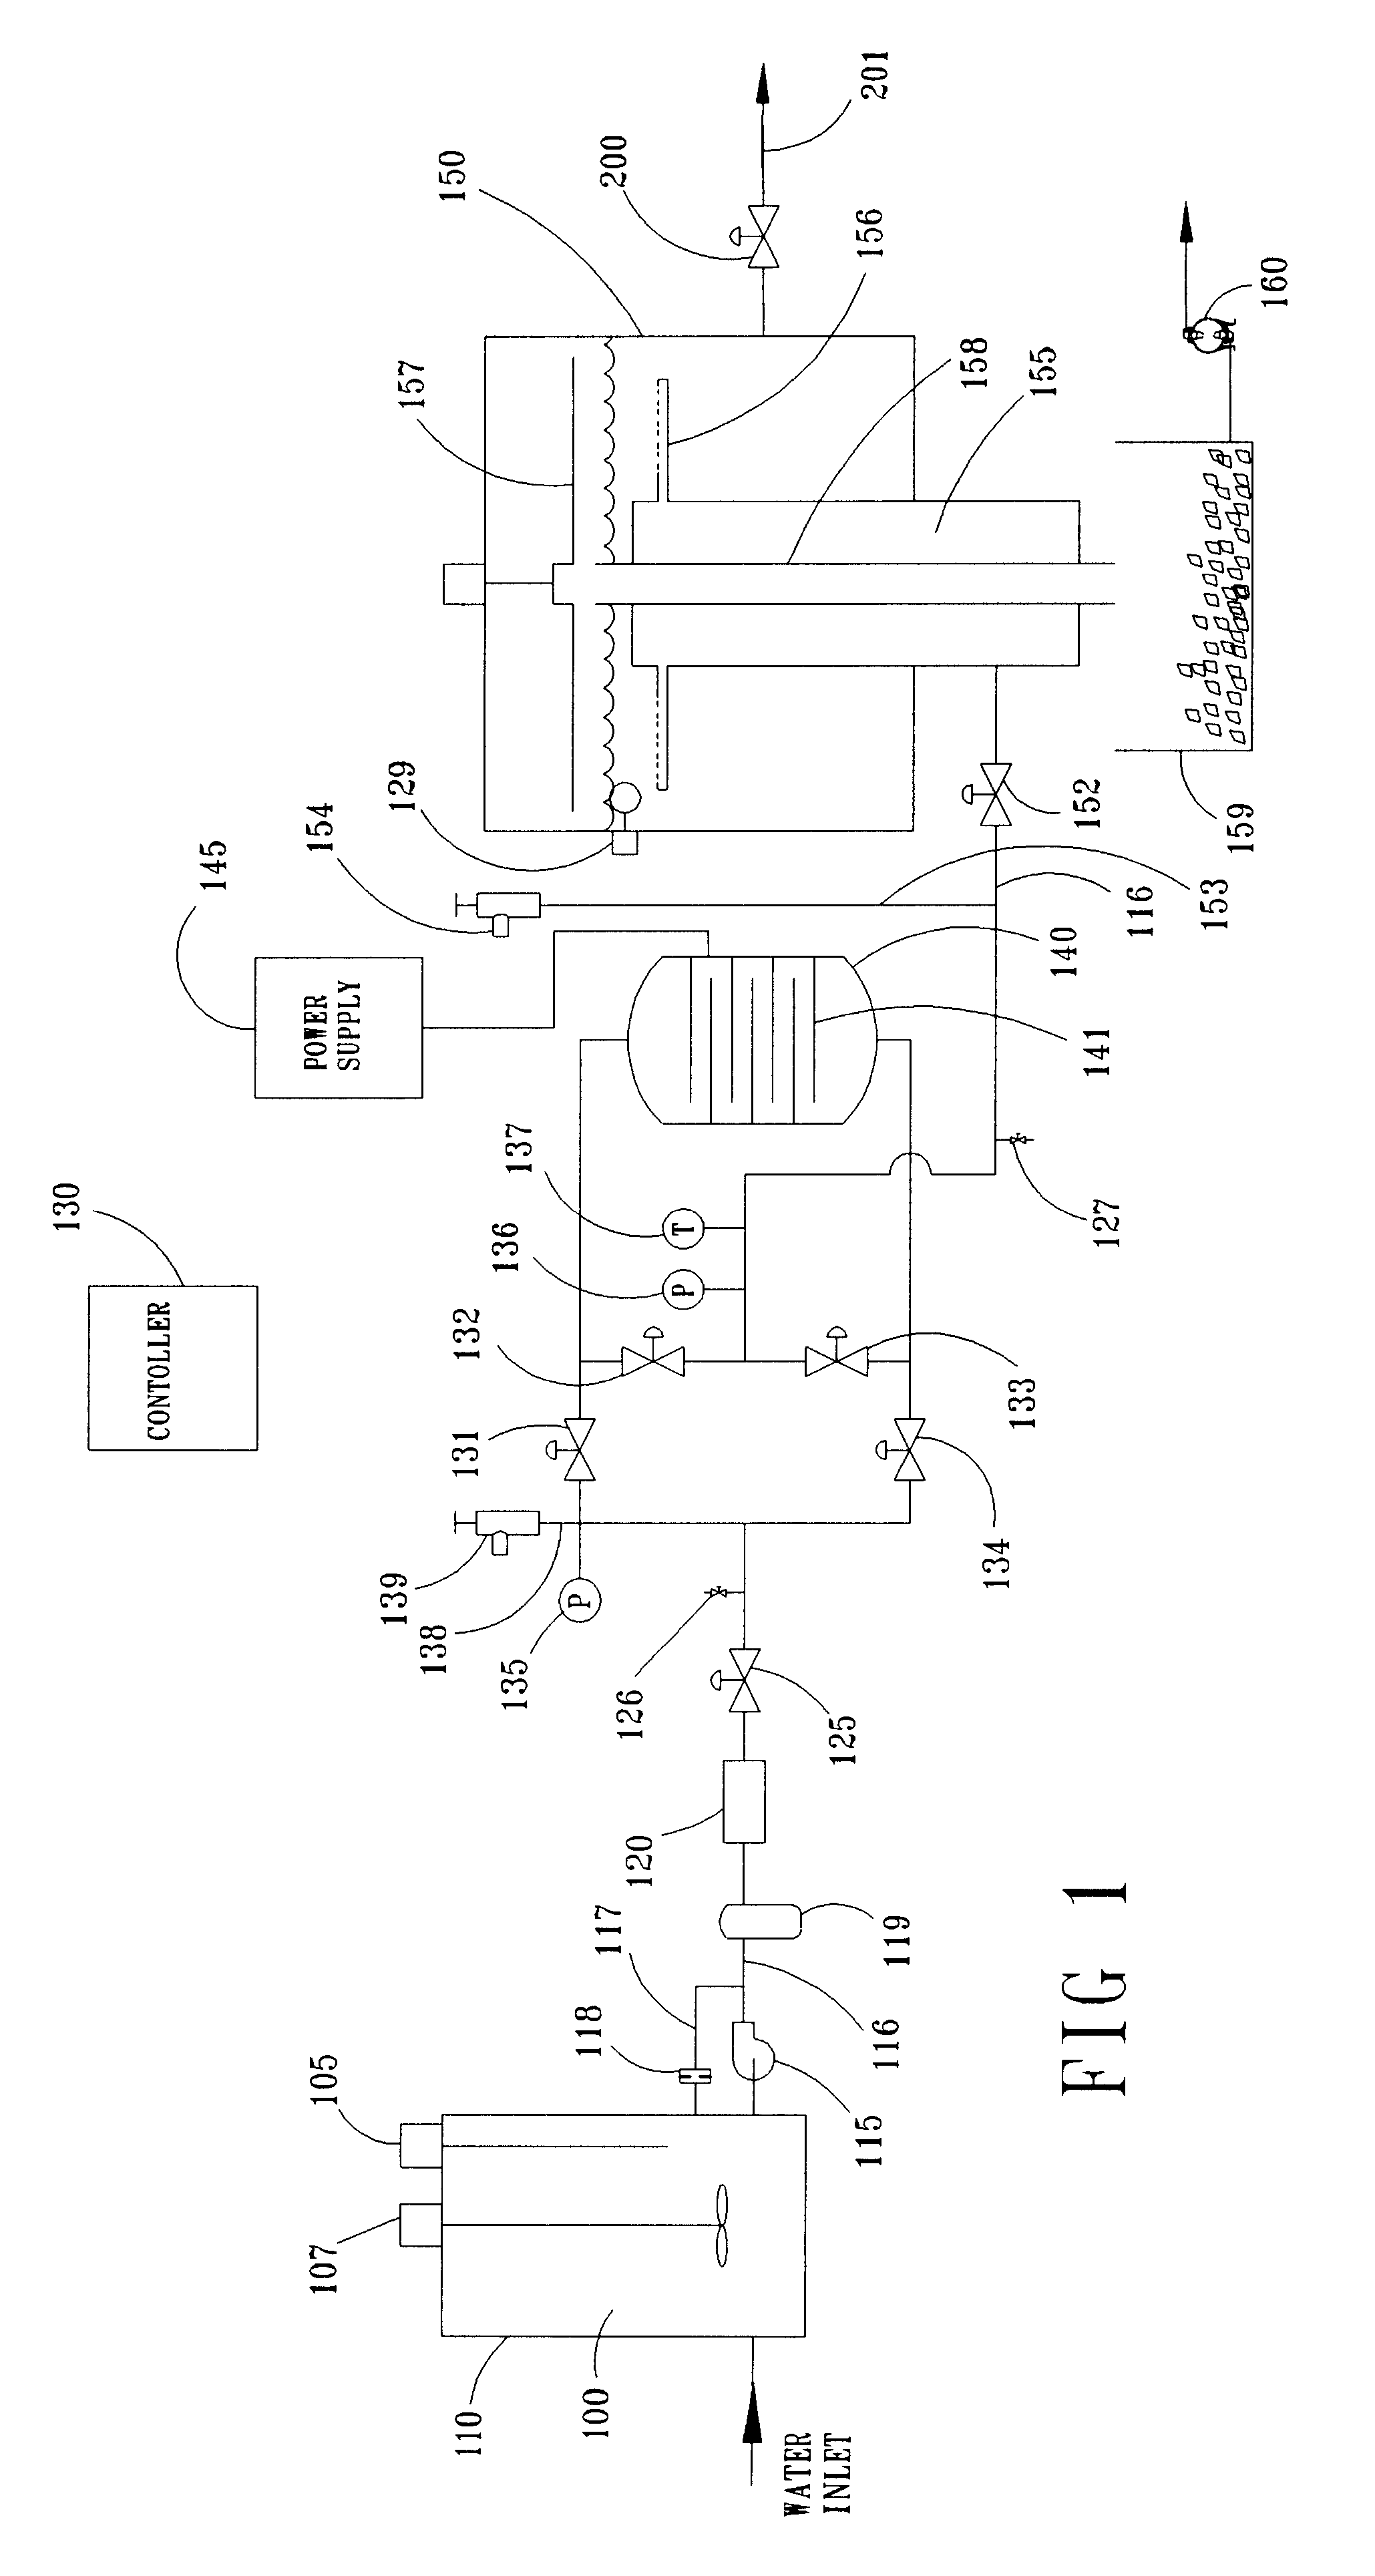 Process for electrocoagulating waste fluids